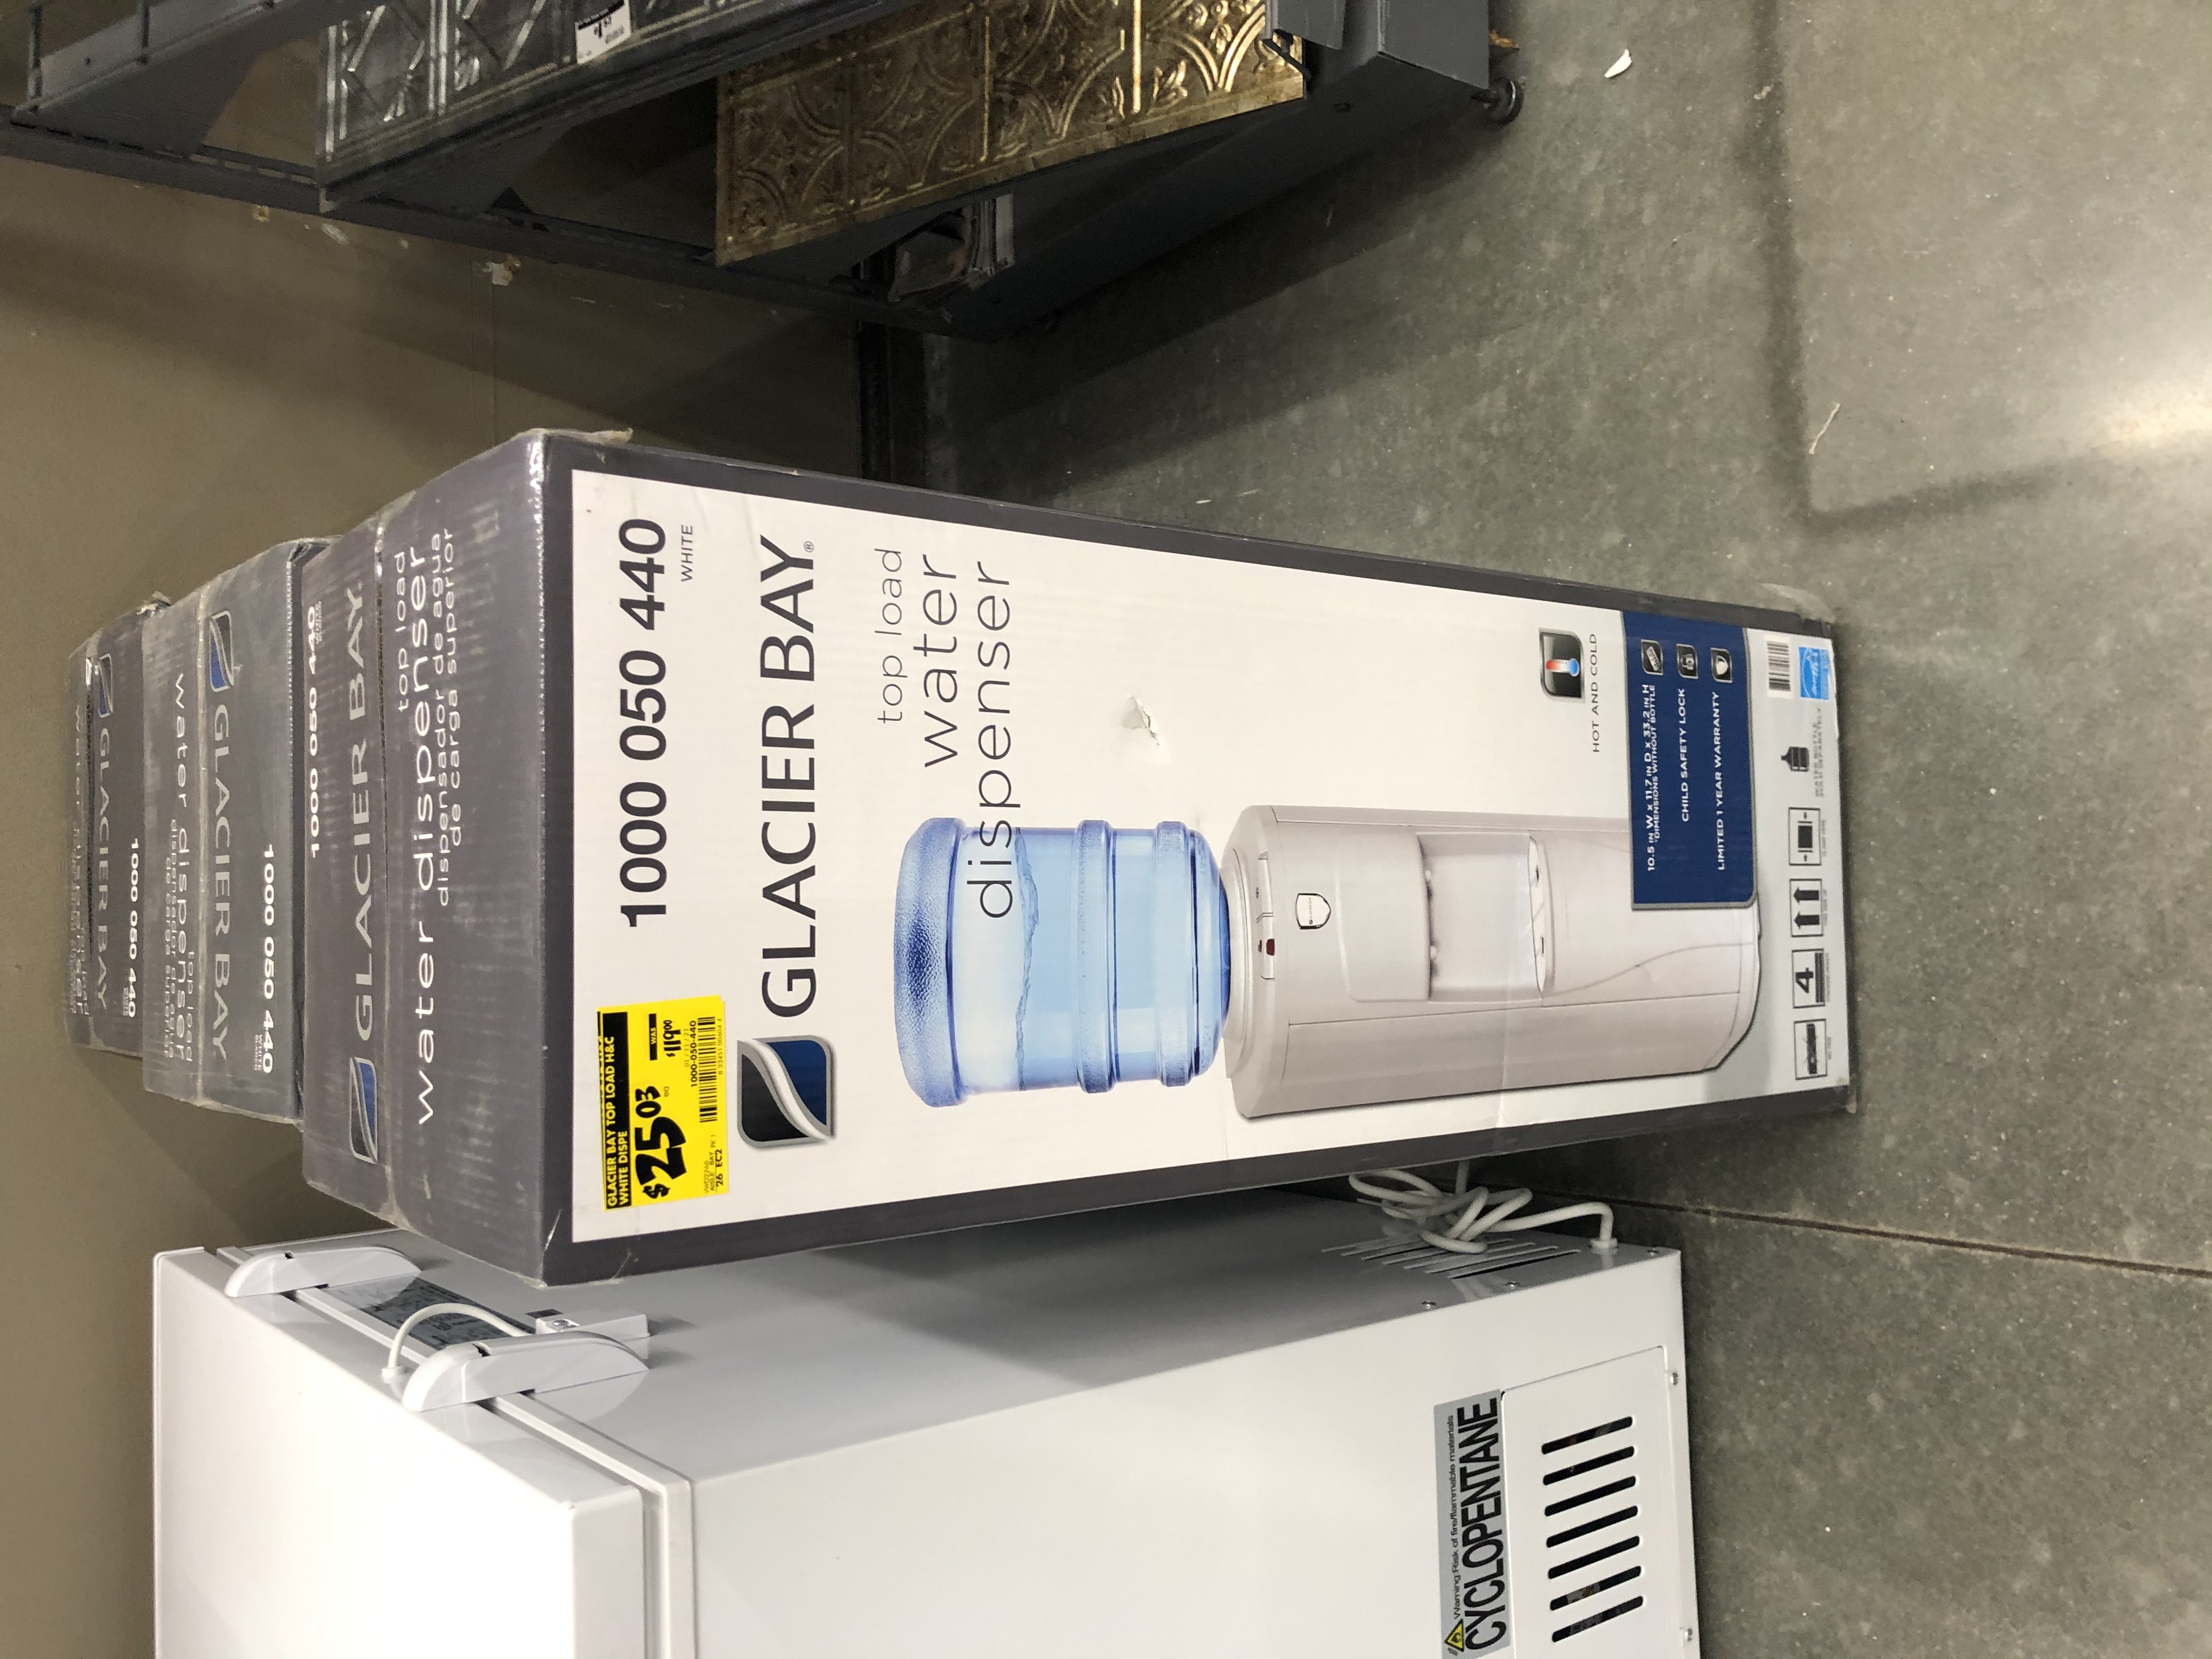 Glacier Bay Hot & Cold Water Dispenser $25.03 @ Home Depot B&M Clearance (YMMV)